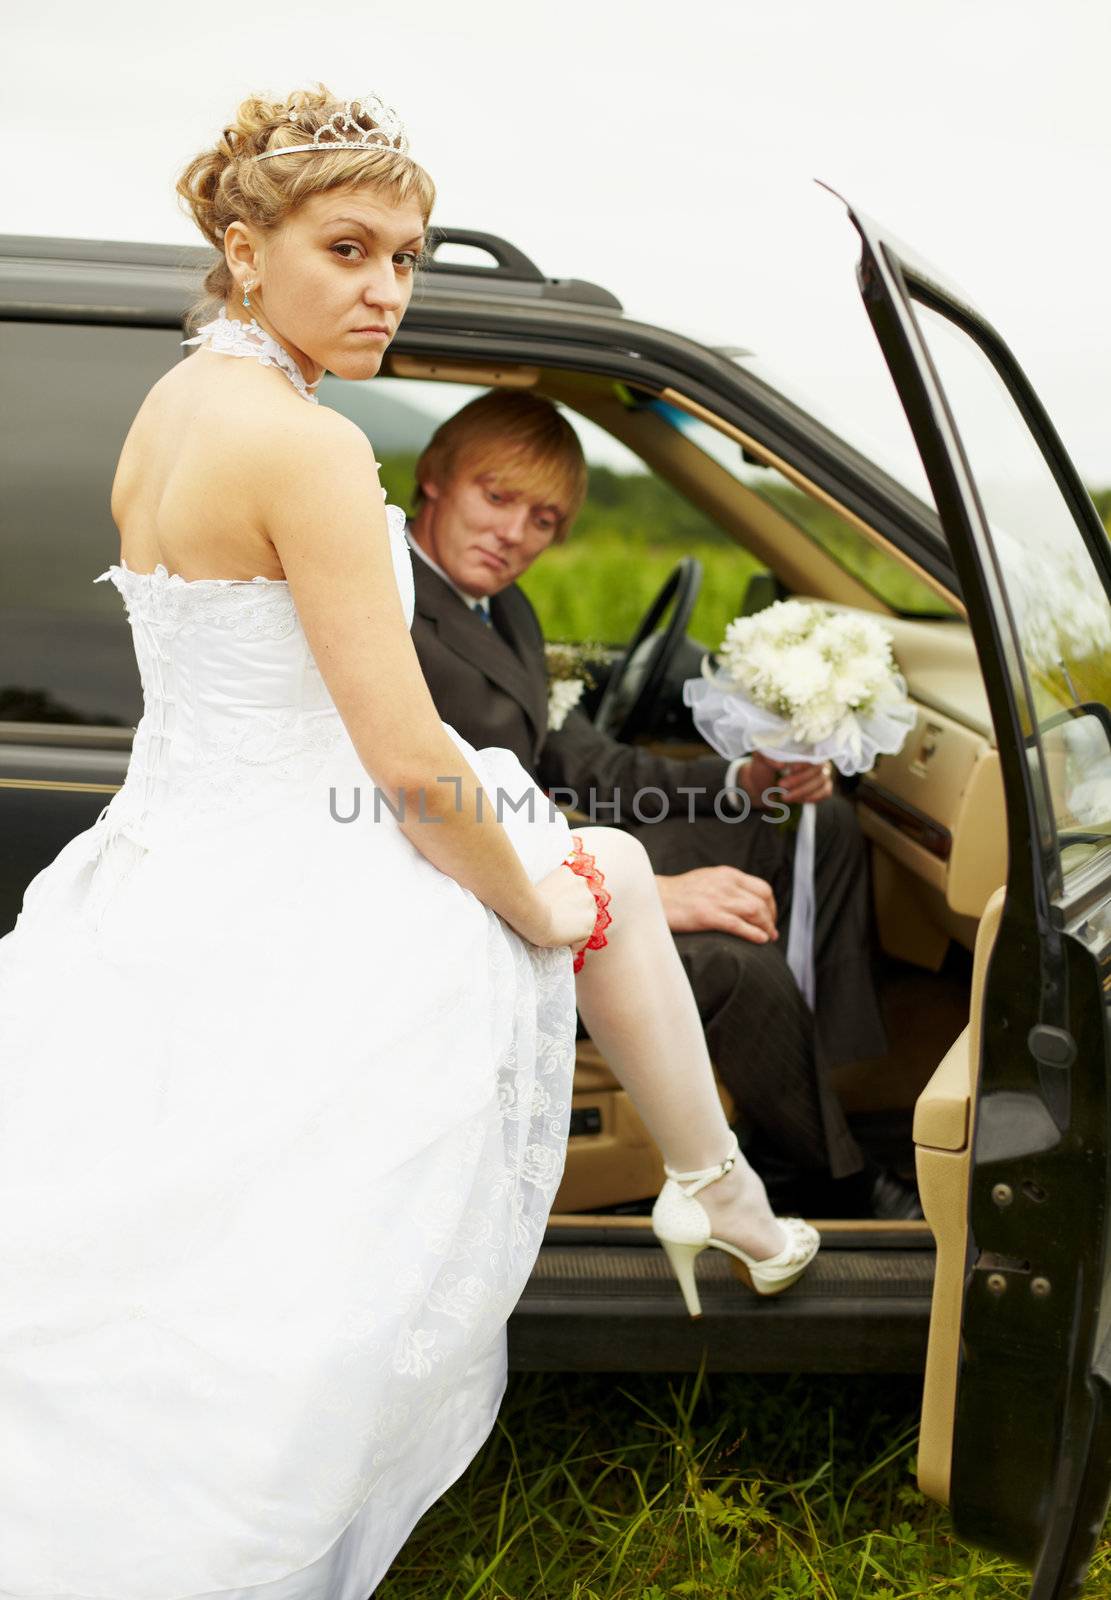 The sexual bride and the groom in the car